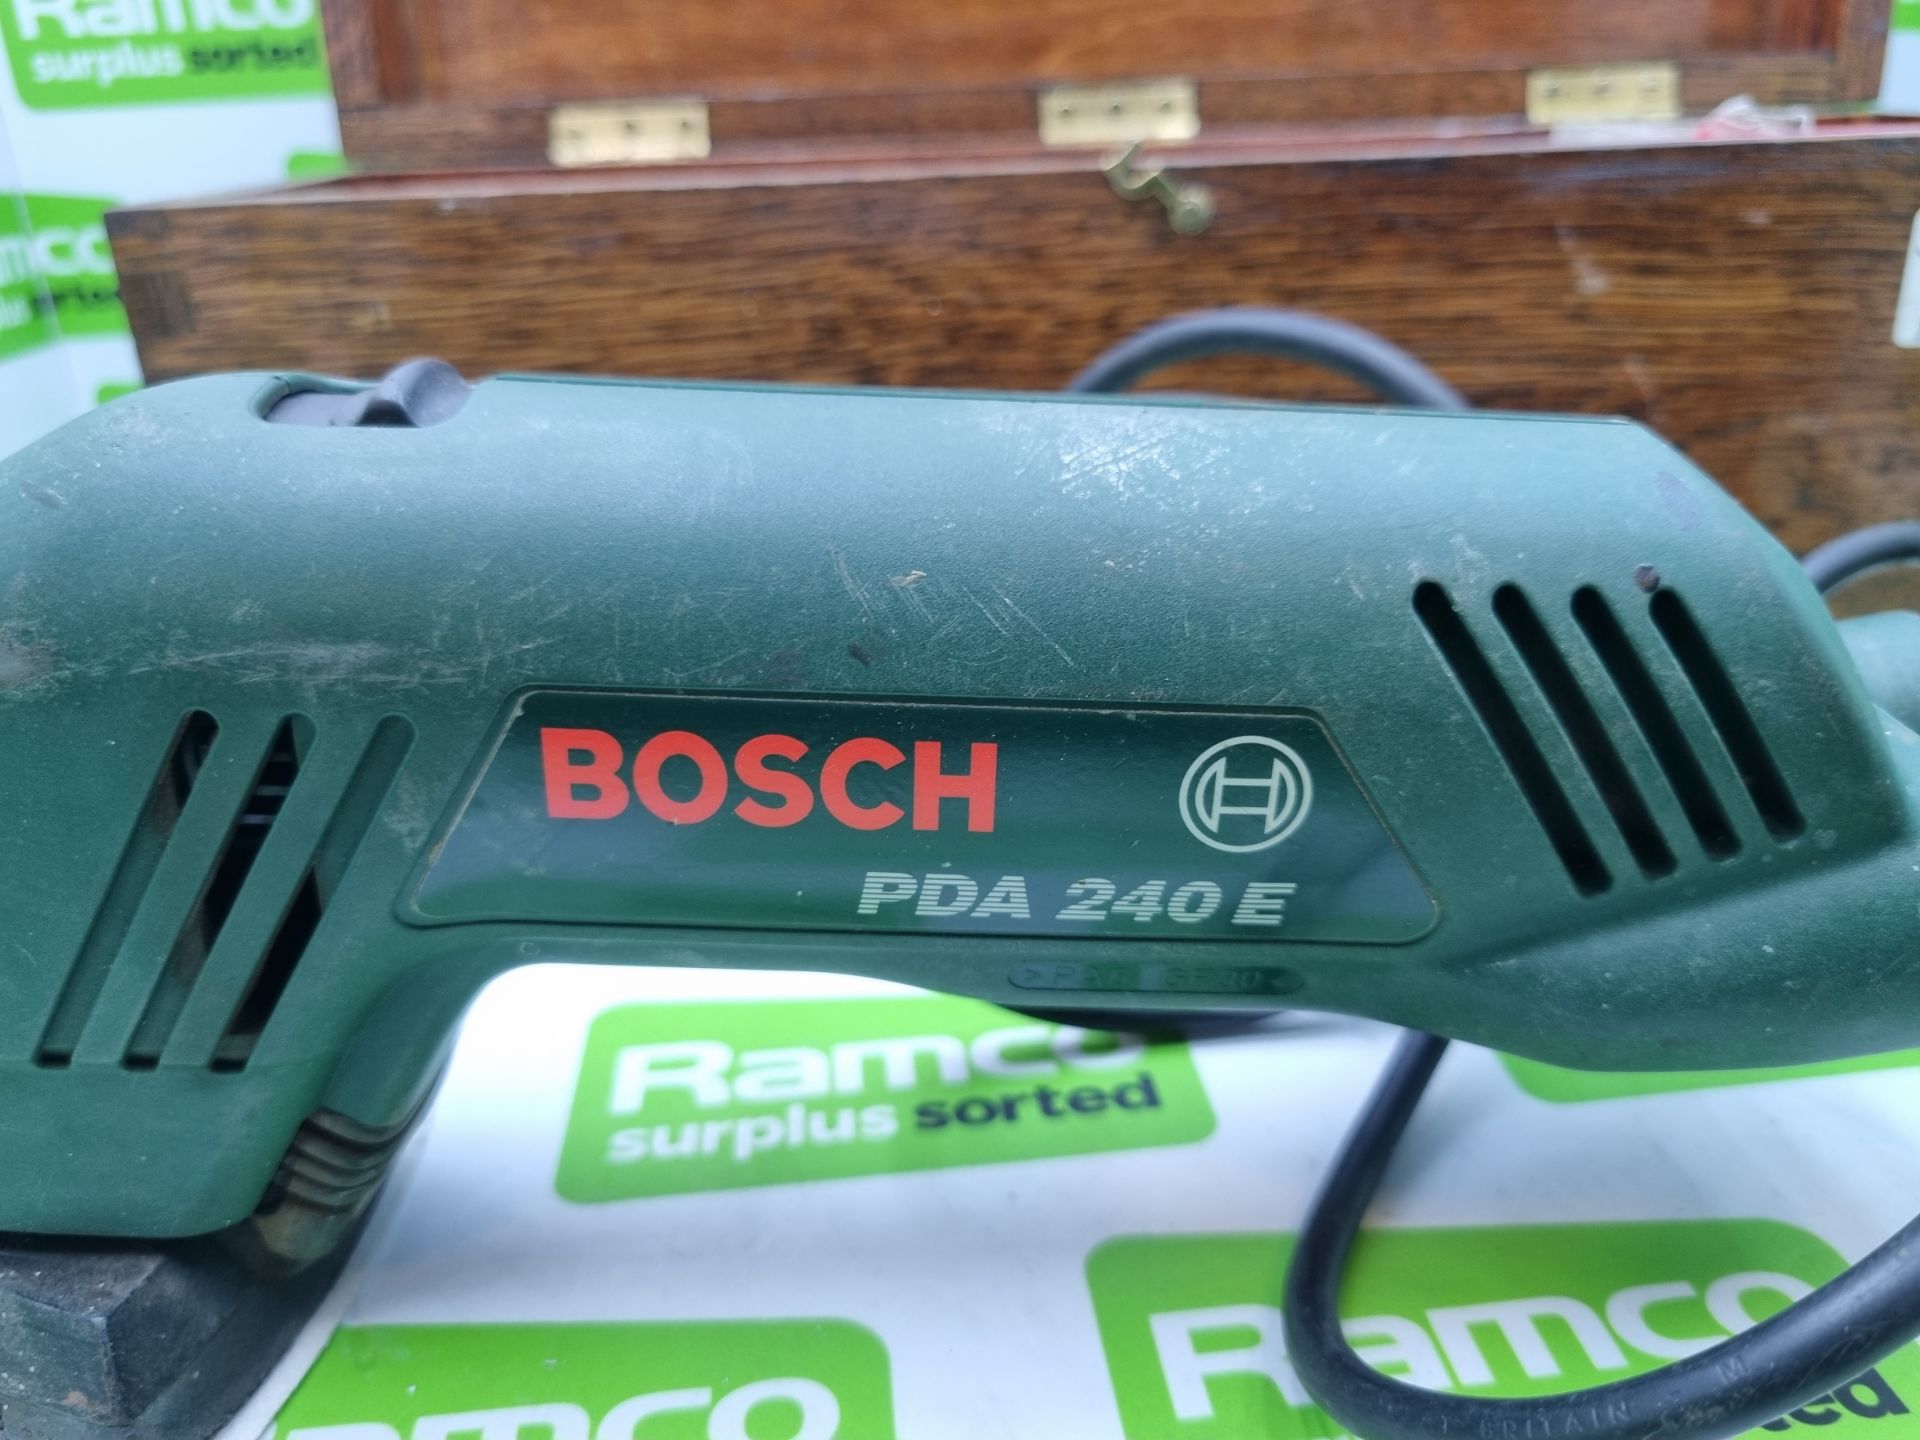 Bosch PDA 240E electric sander 240v with wooden case - Image 3 of 4